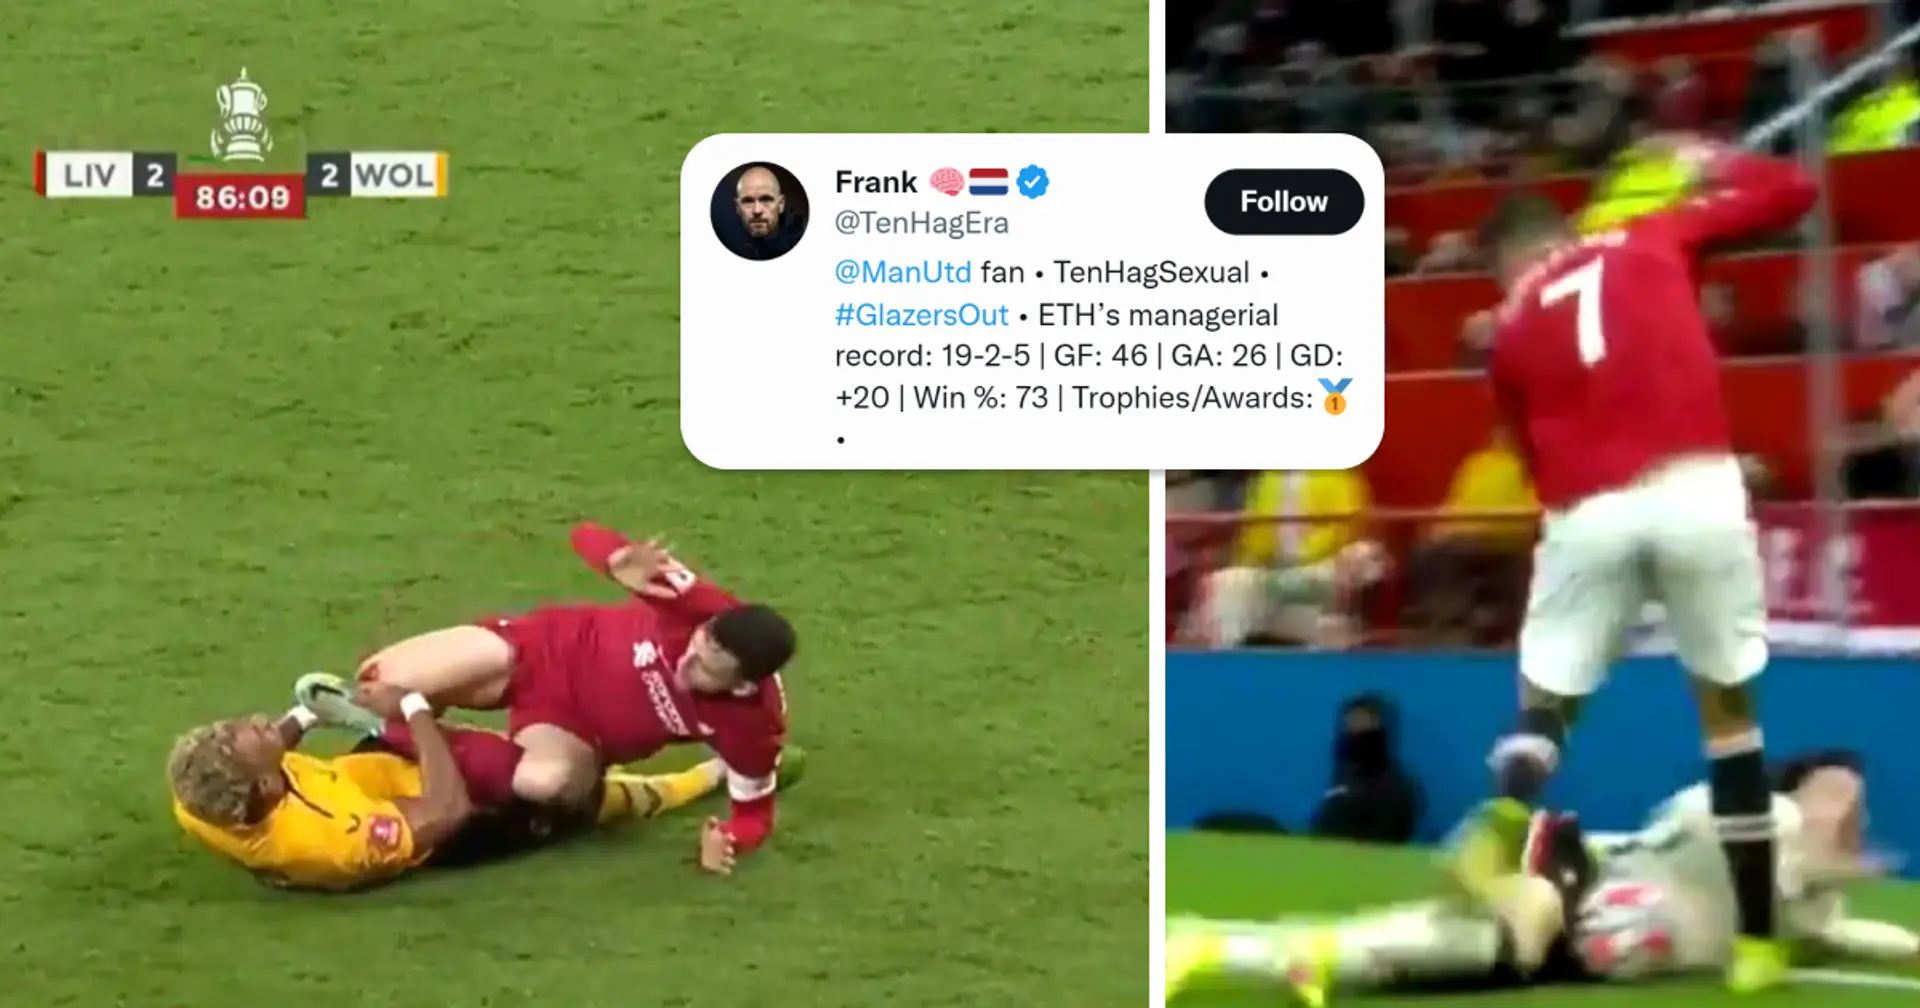 United fan who calls himself 'TenHagSexual' whines about Robertson's tackle on Adama - gets roasted with 4 pics